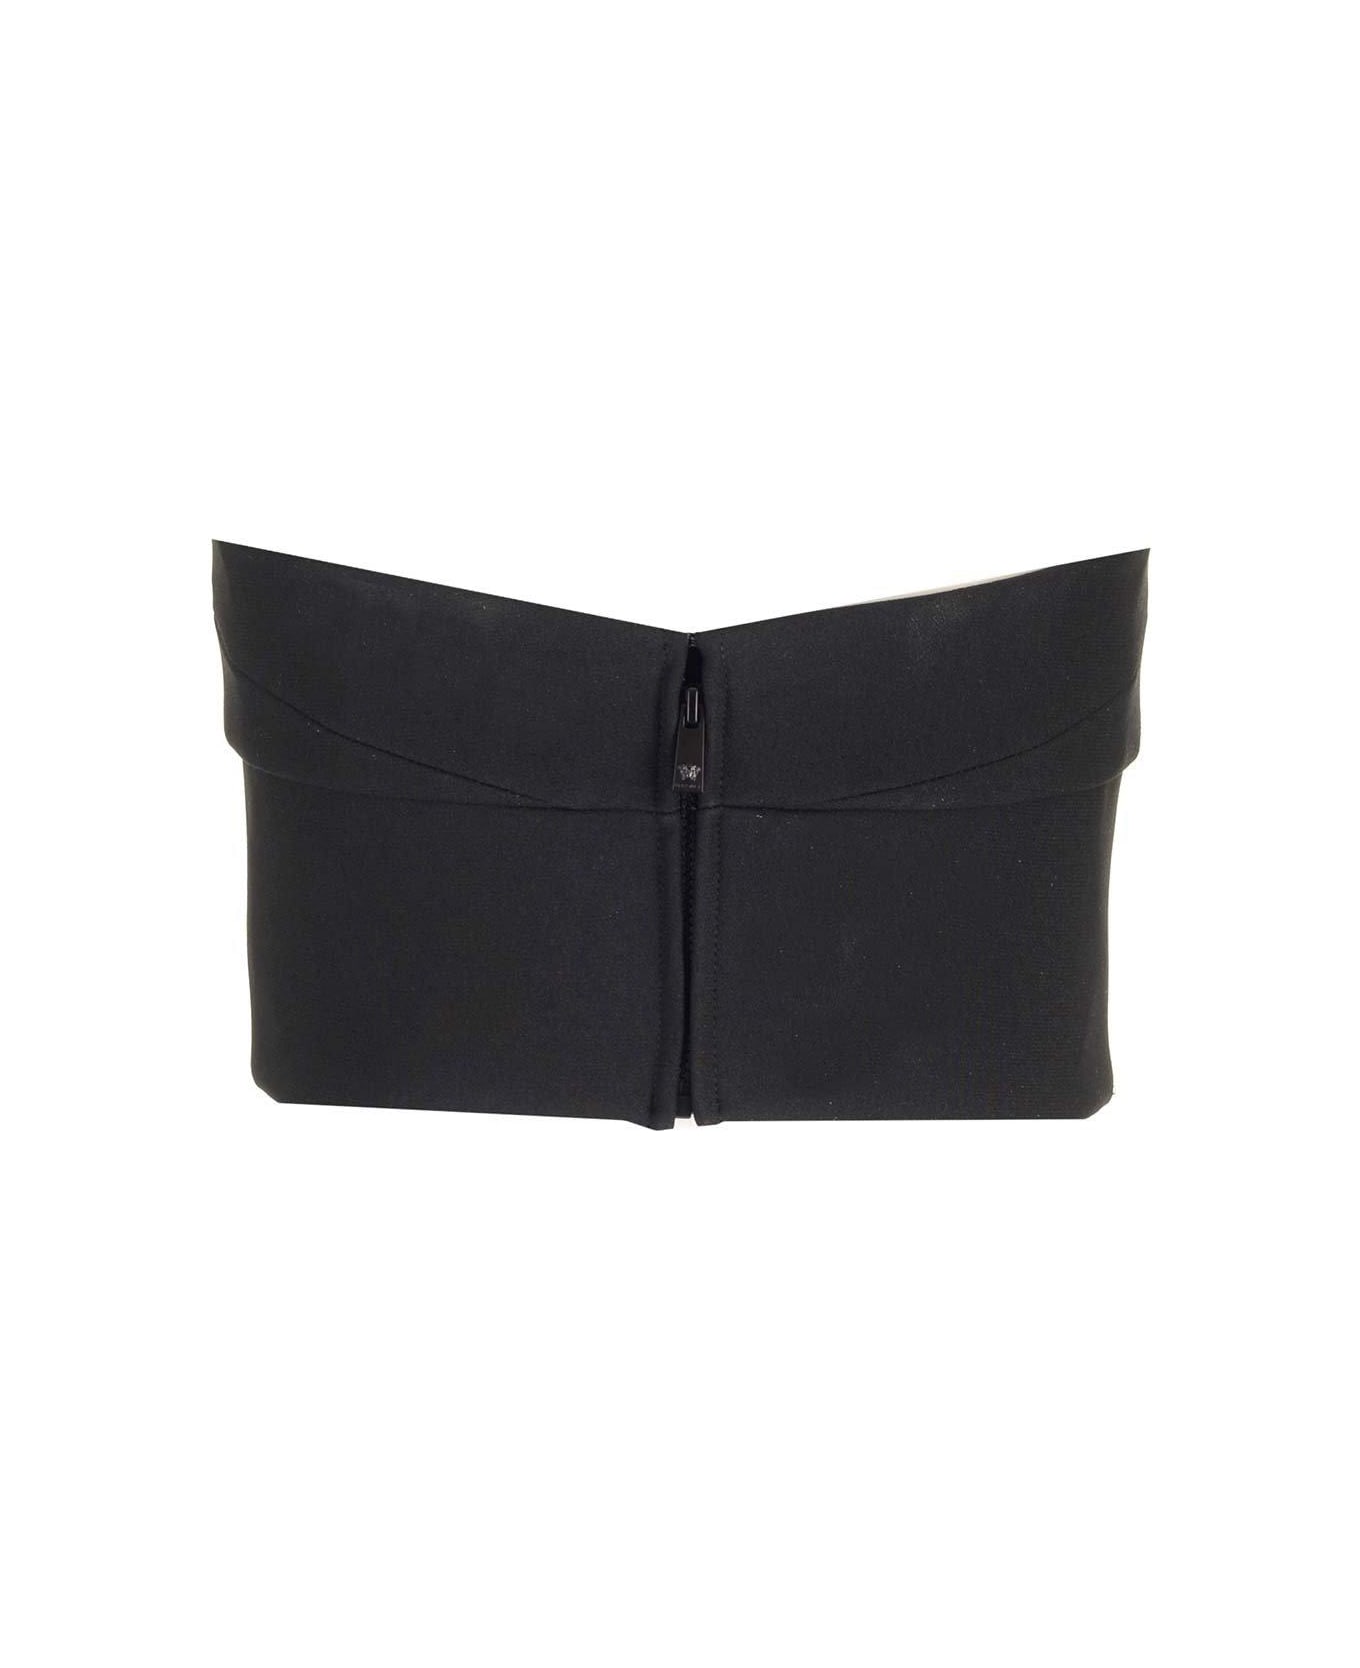 Versace Strapless Cropped Top - Black